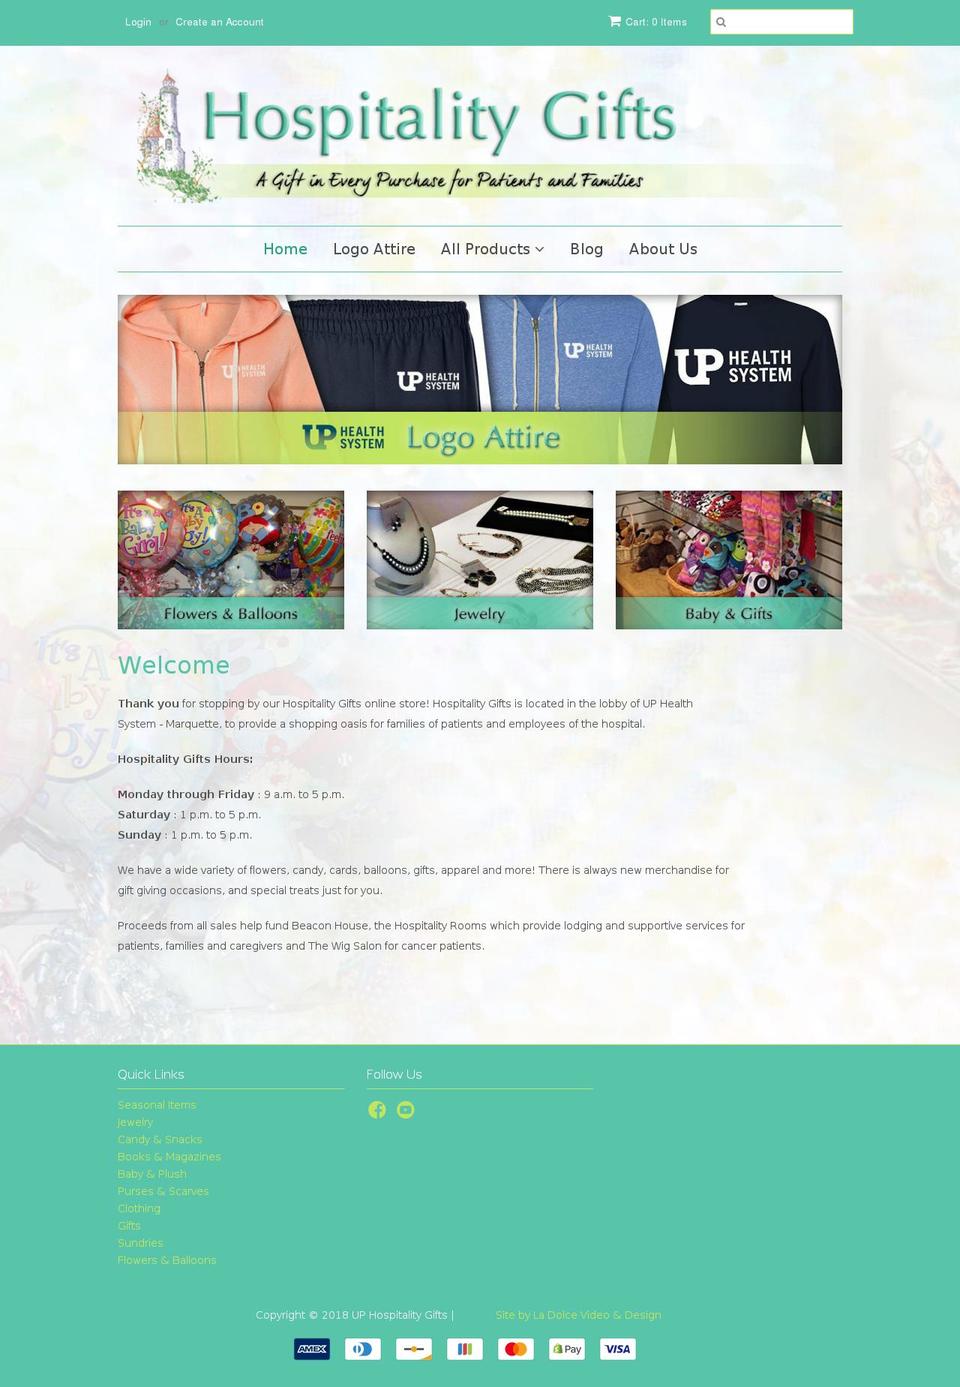 Gifts Shopify theme site example uphospitalitygifts.com